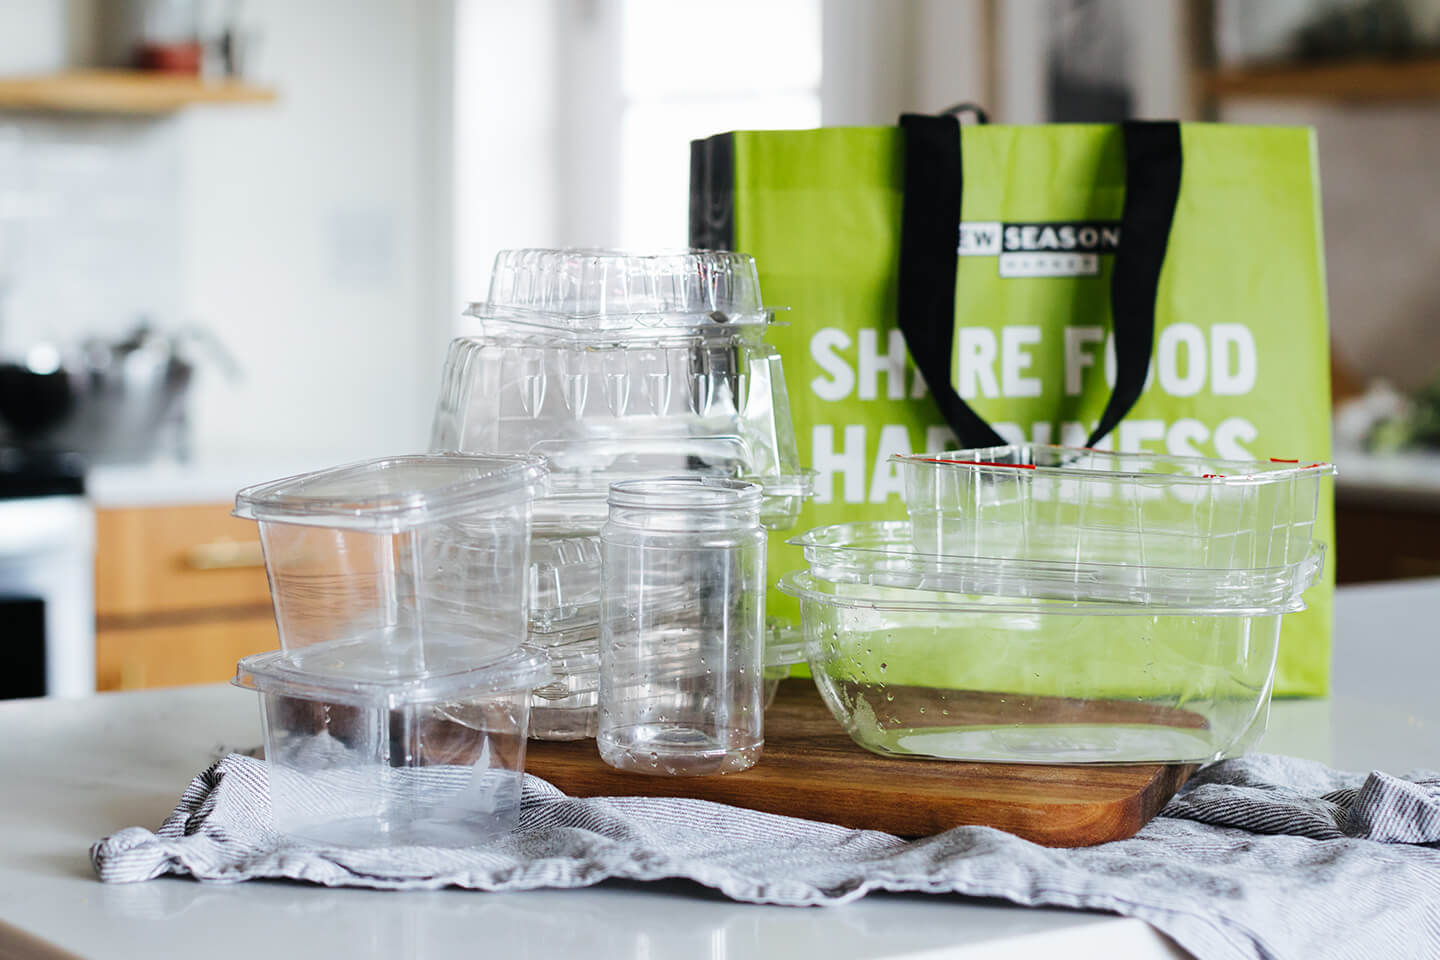 Various clean plastic containers on a counter top sitting in front of a reusable shopping bag.